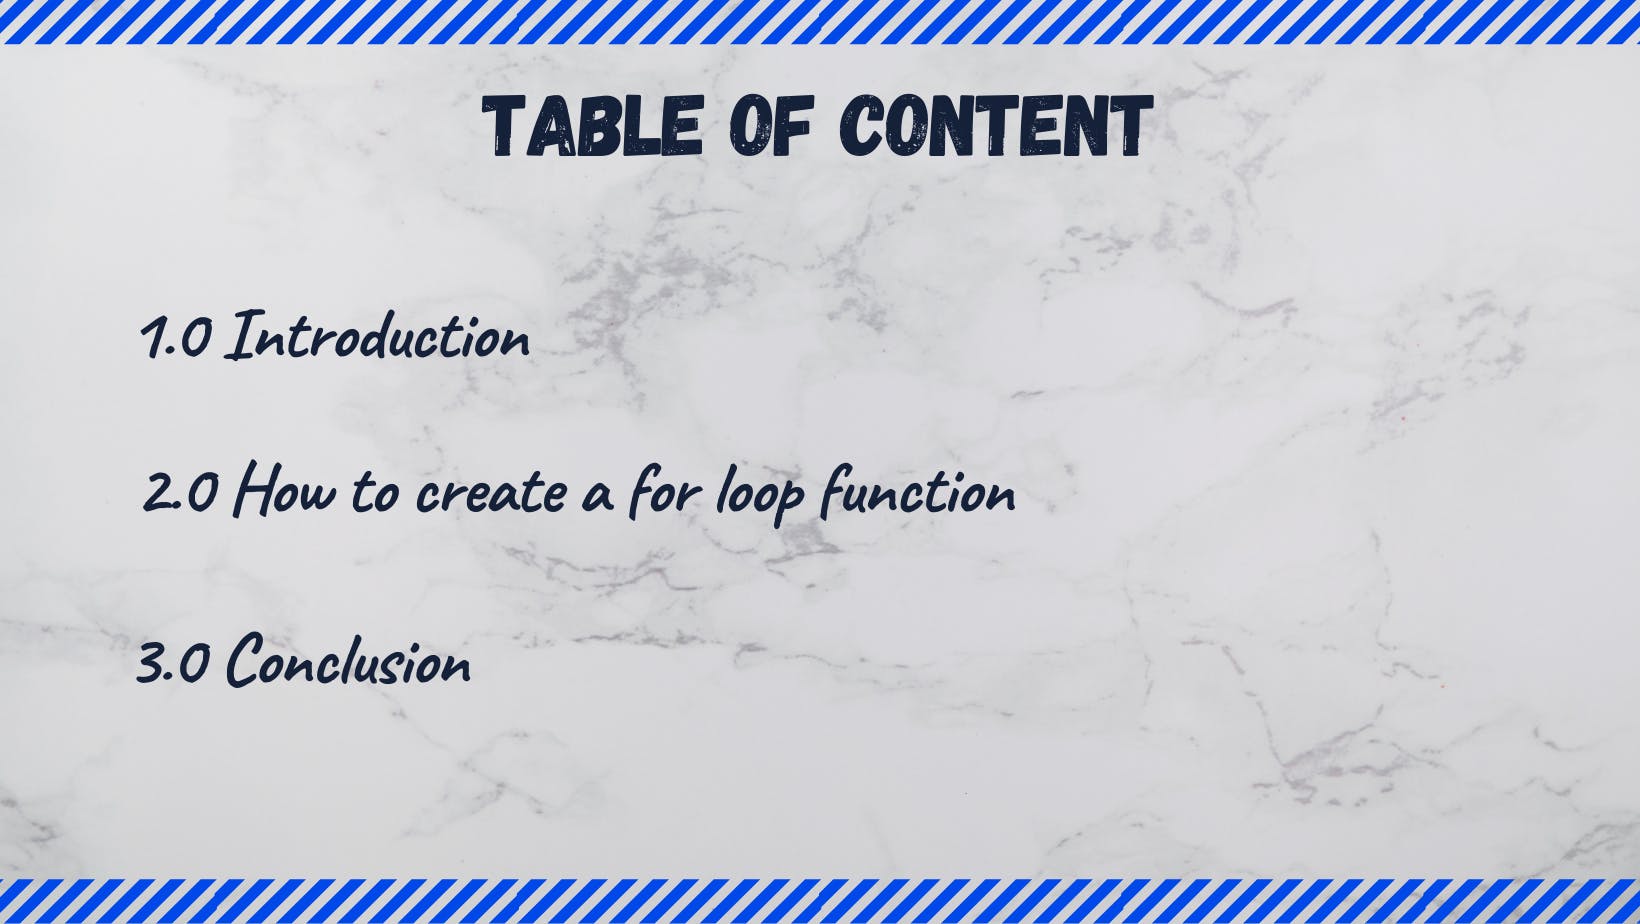 Table of content(1).png